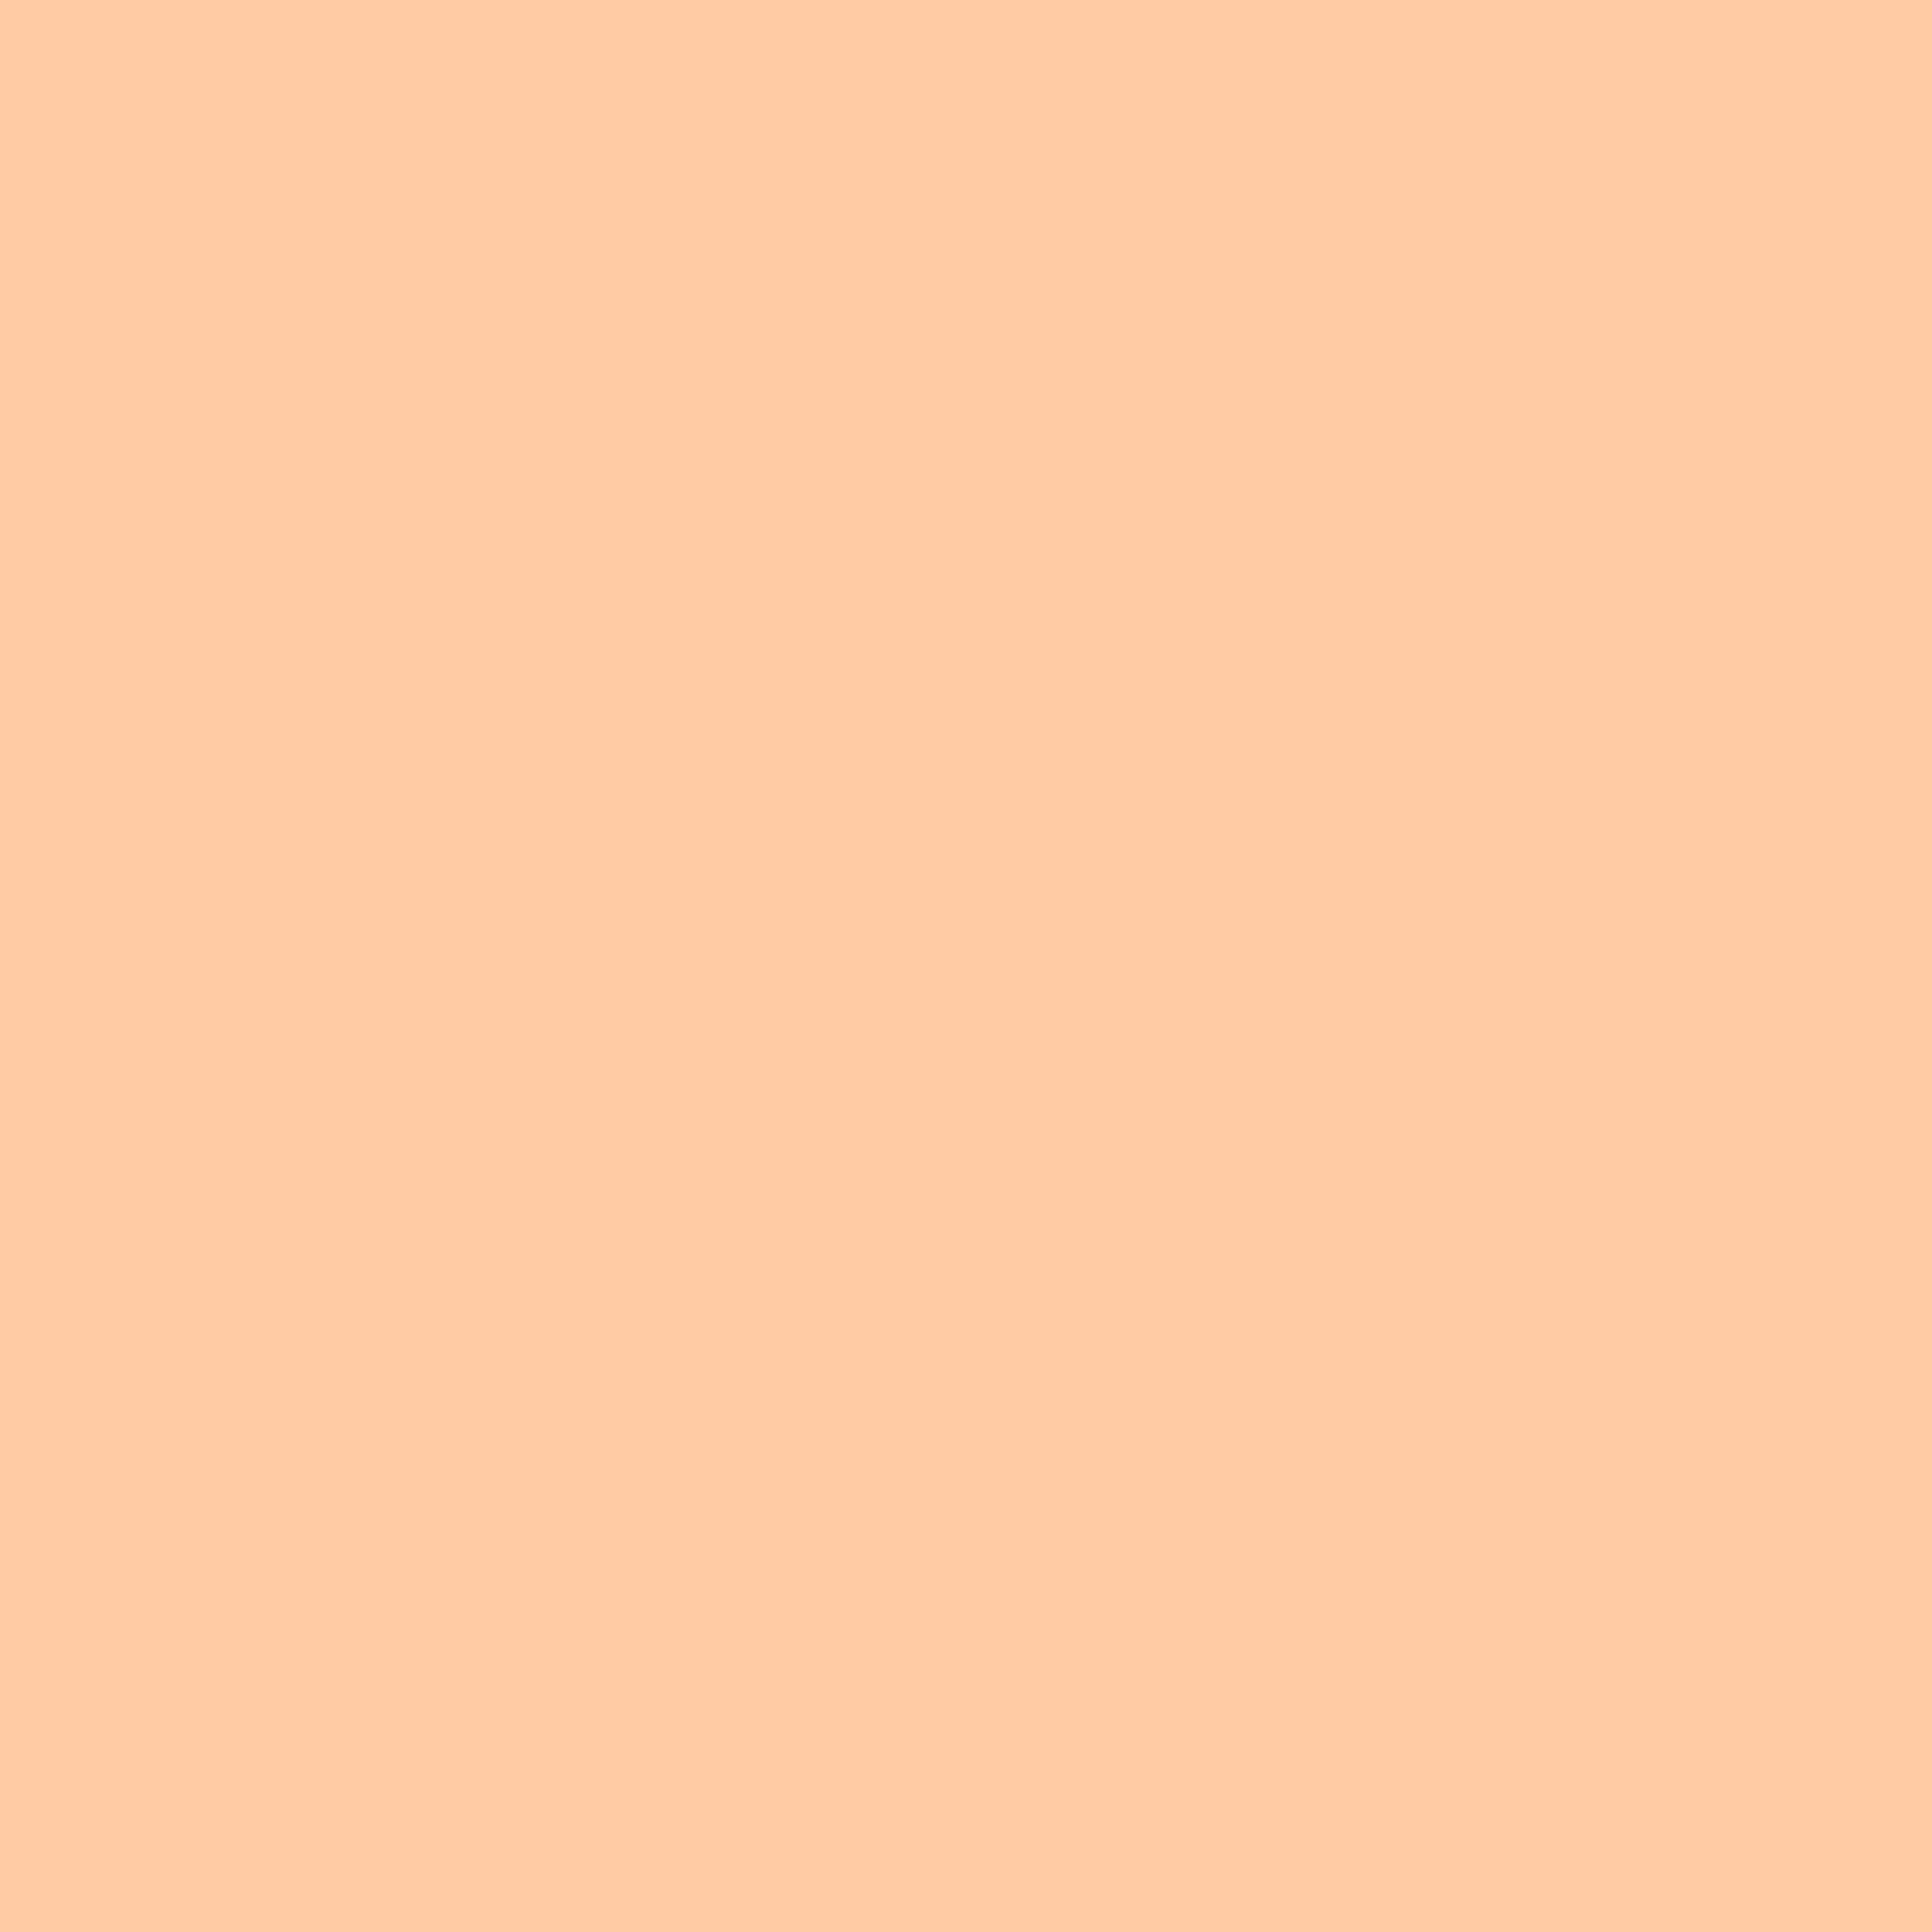 2732x2732 Deep Peach Solid Color Background 2732x2732